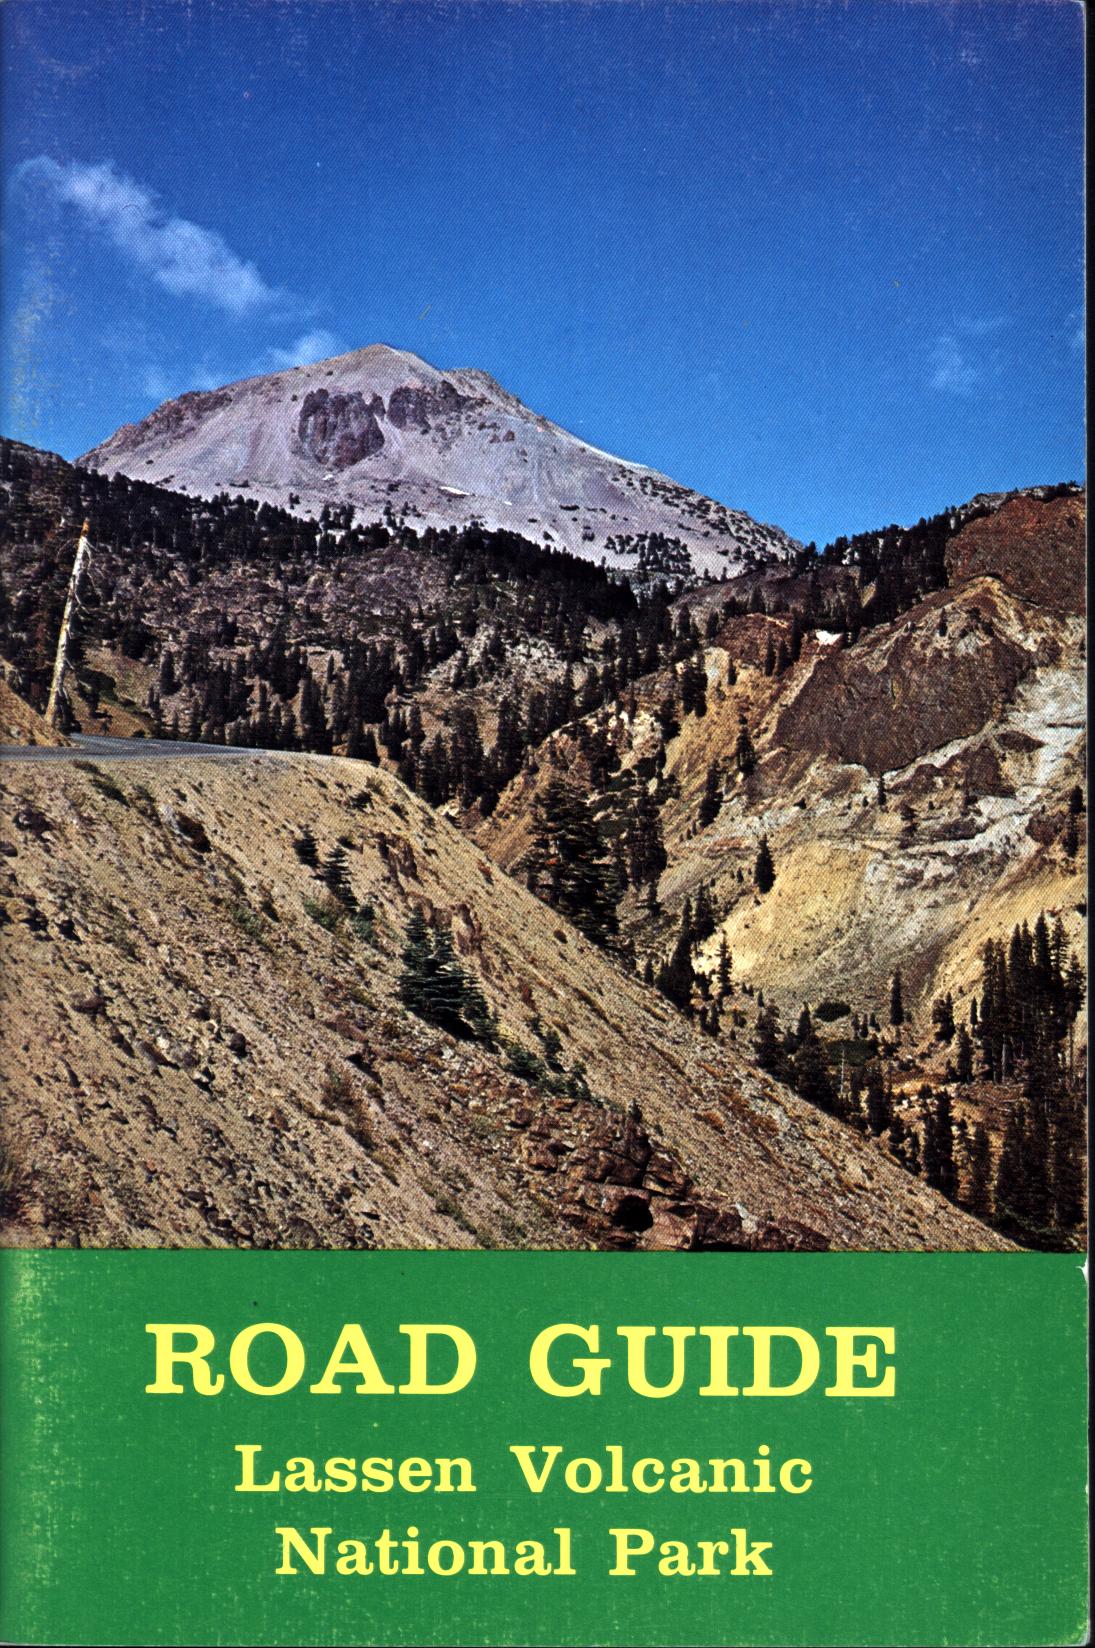 ROAD GUIDE TO LASSEN VOLCANIC NATIONAL PARK.